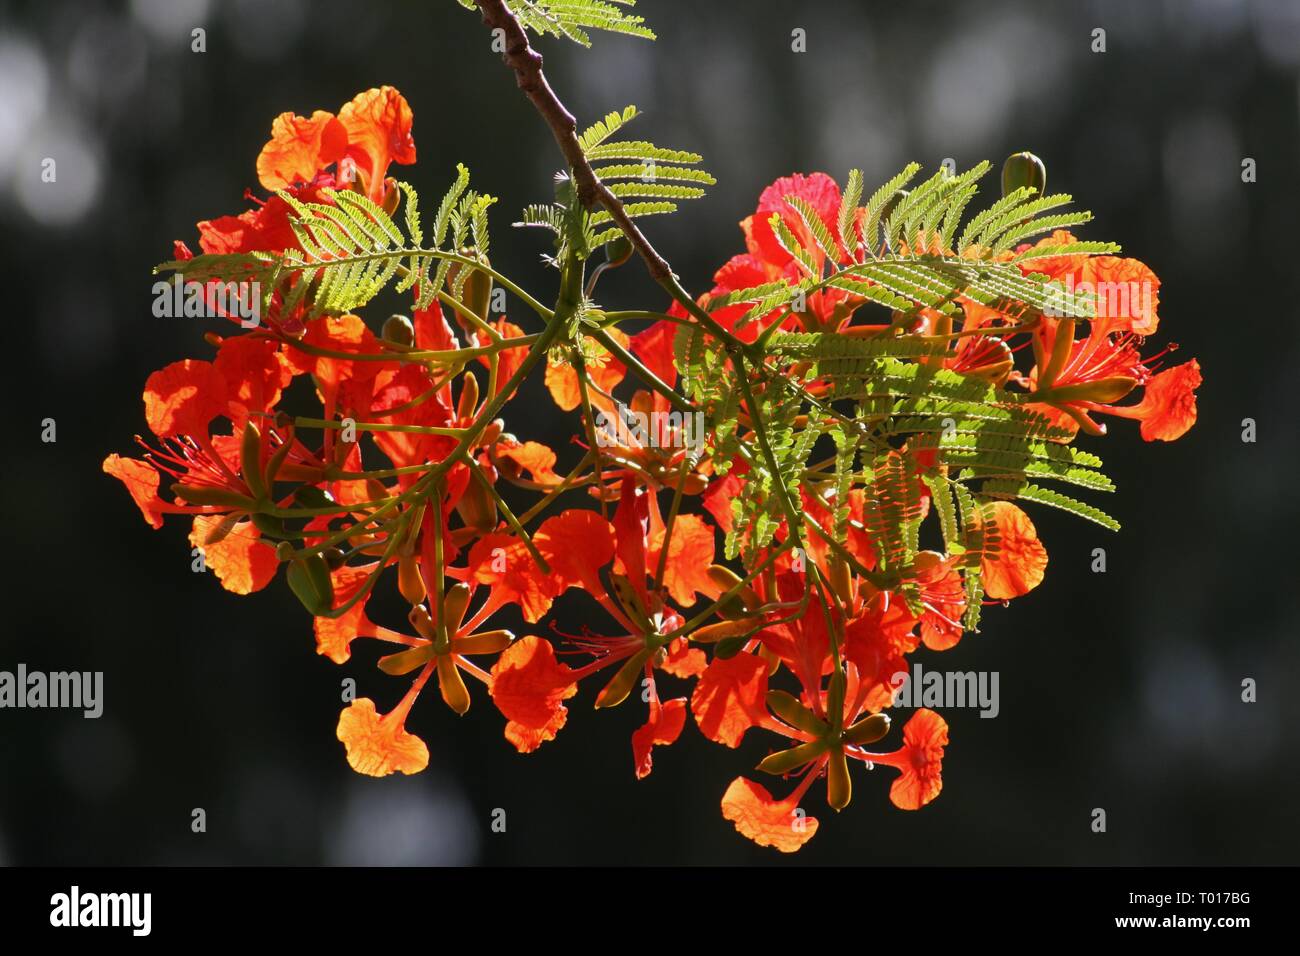 Flame tree flowers in bloom, backside view in dark background Stock Photo